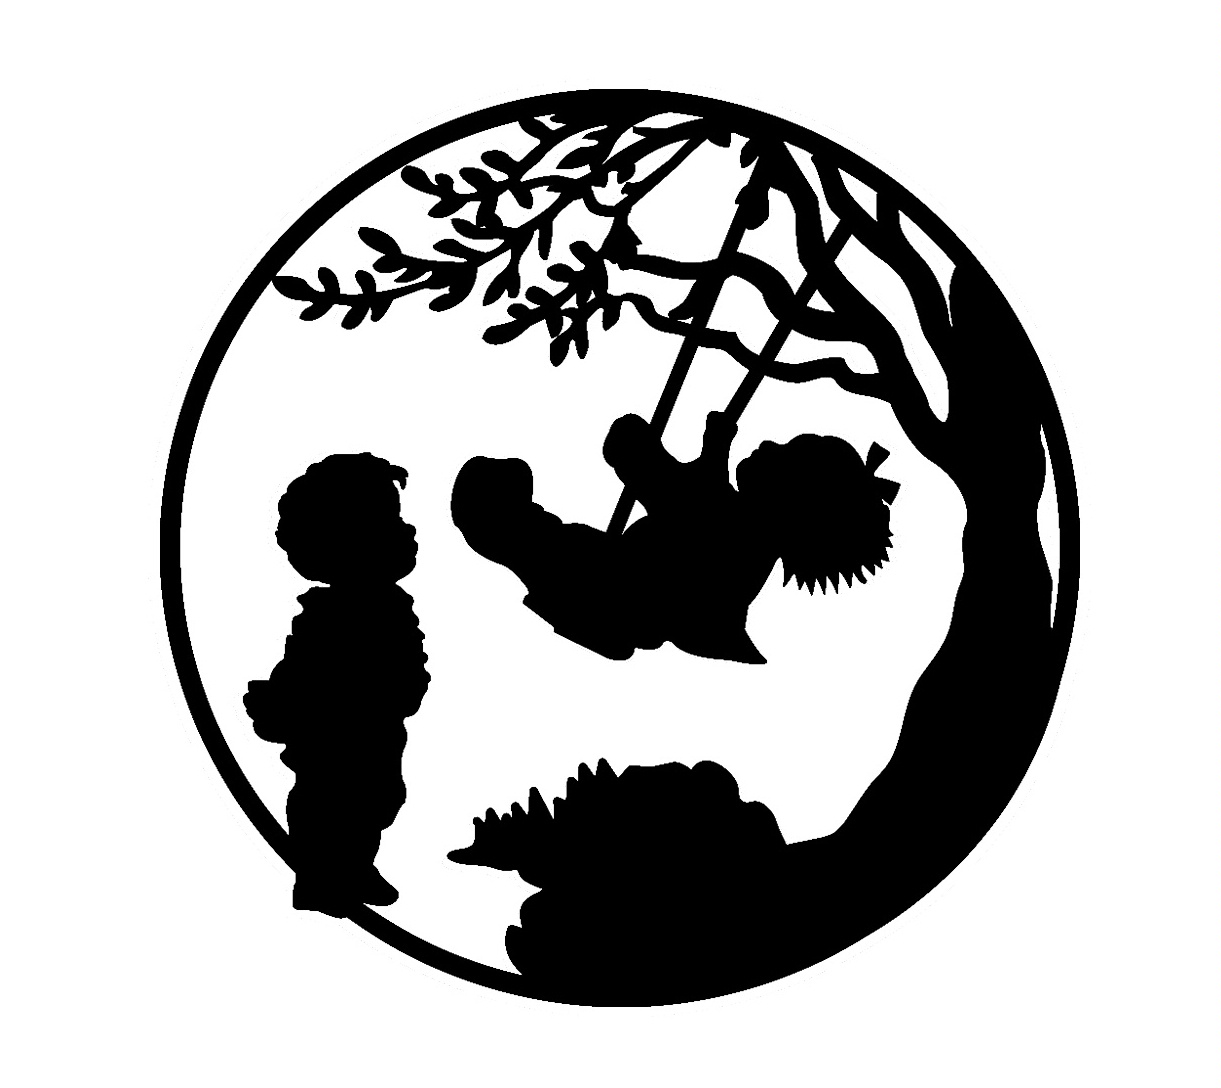 BOY BESIDE TREE WITH GIRL ON SWING, ALL SILHOUETTE by Denise Marle ...